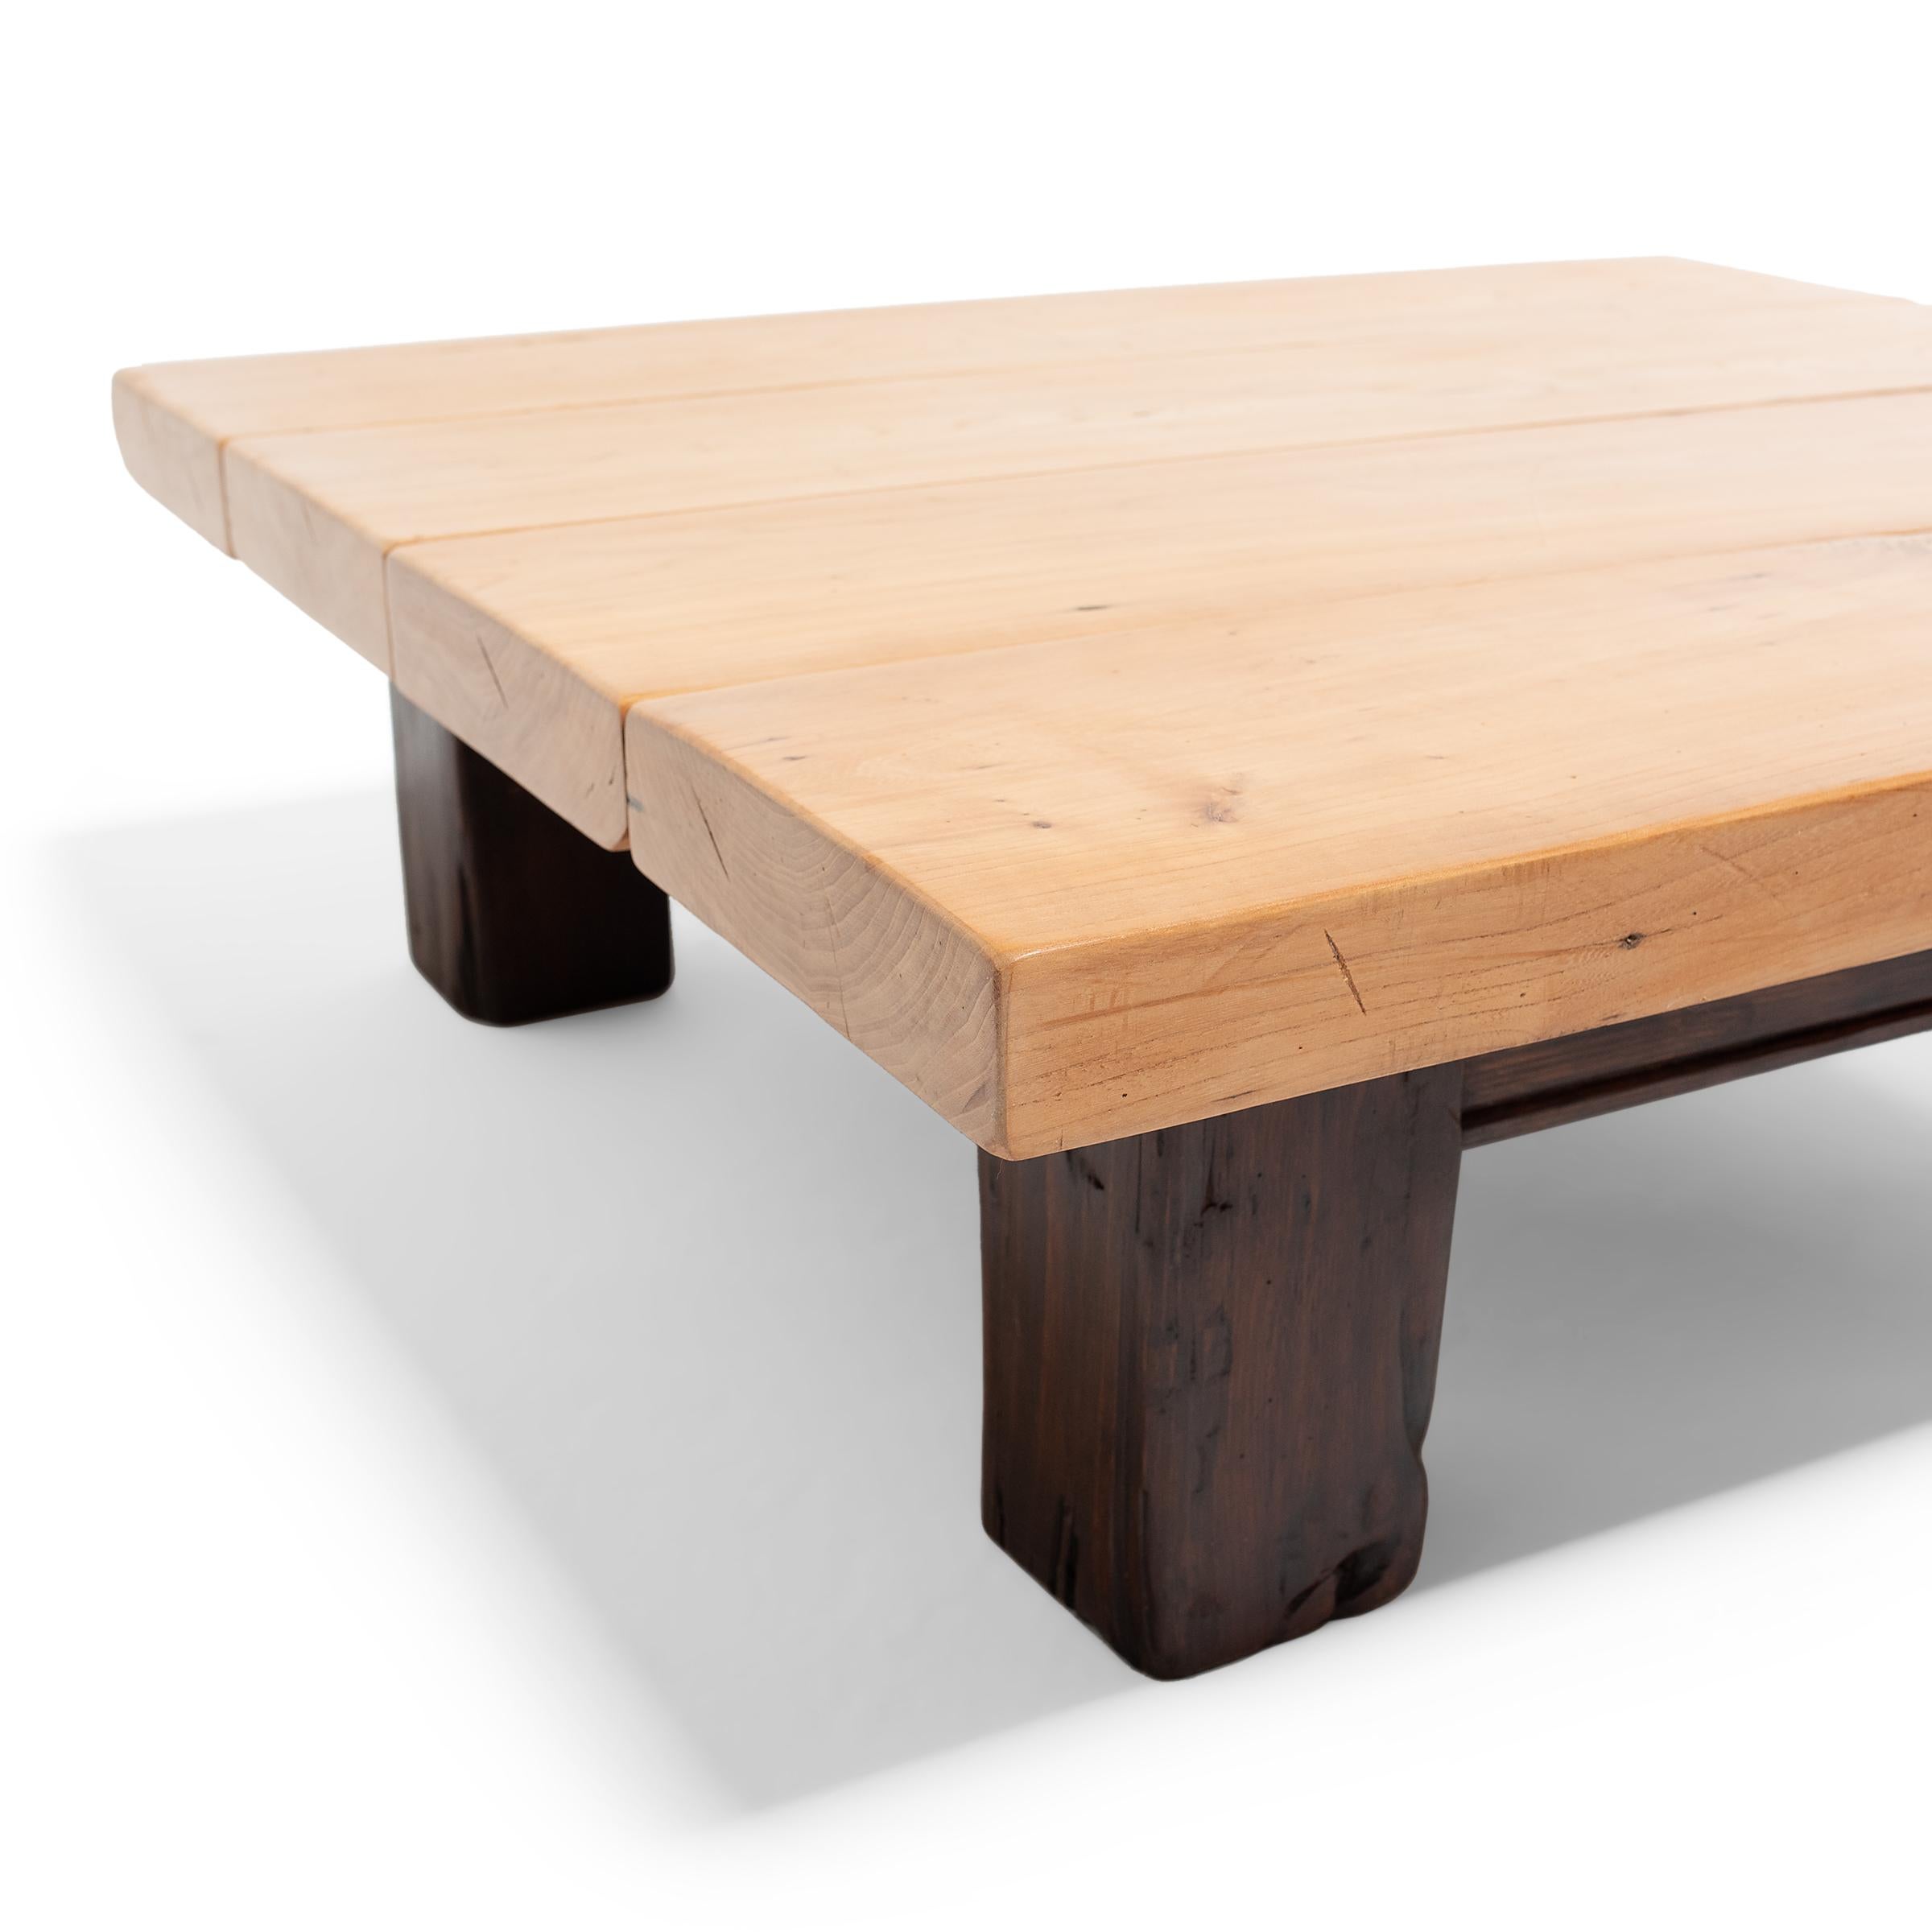 Stained Low Plank Top Plains Table